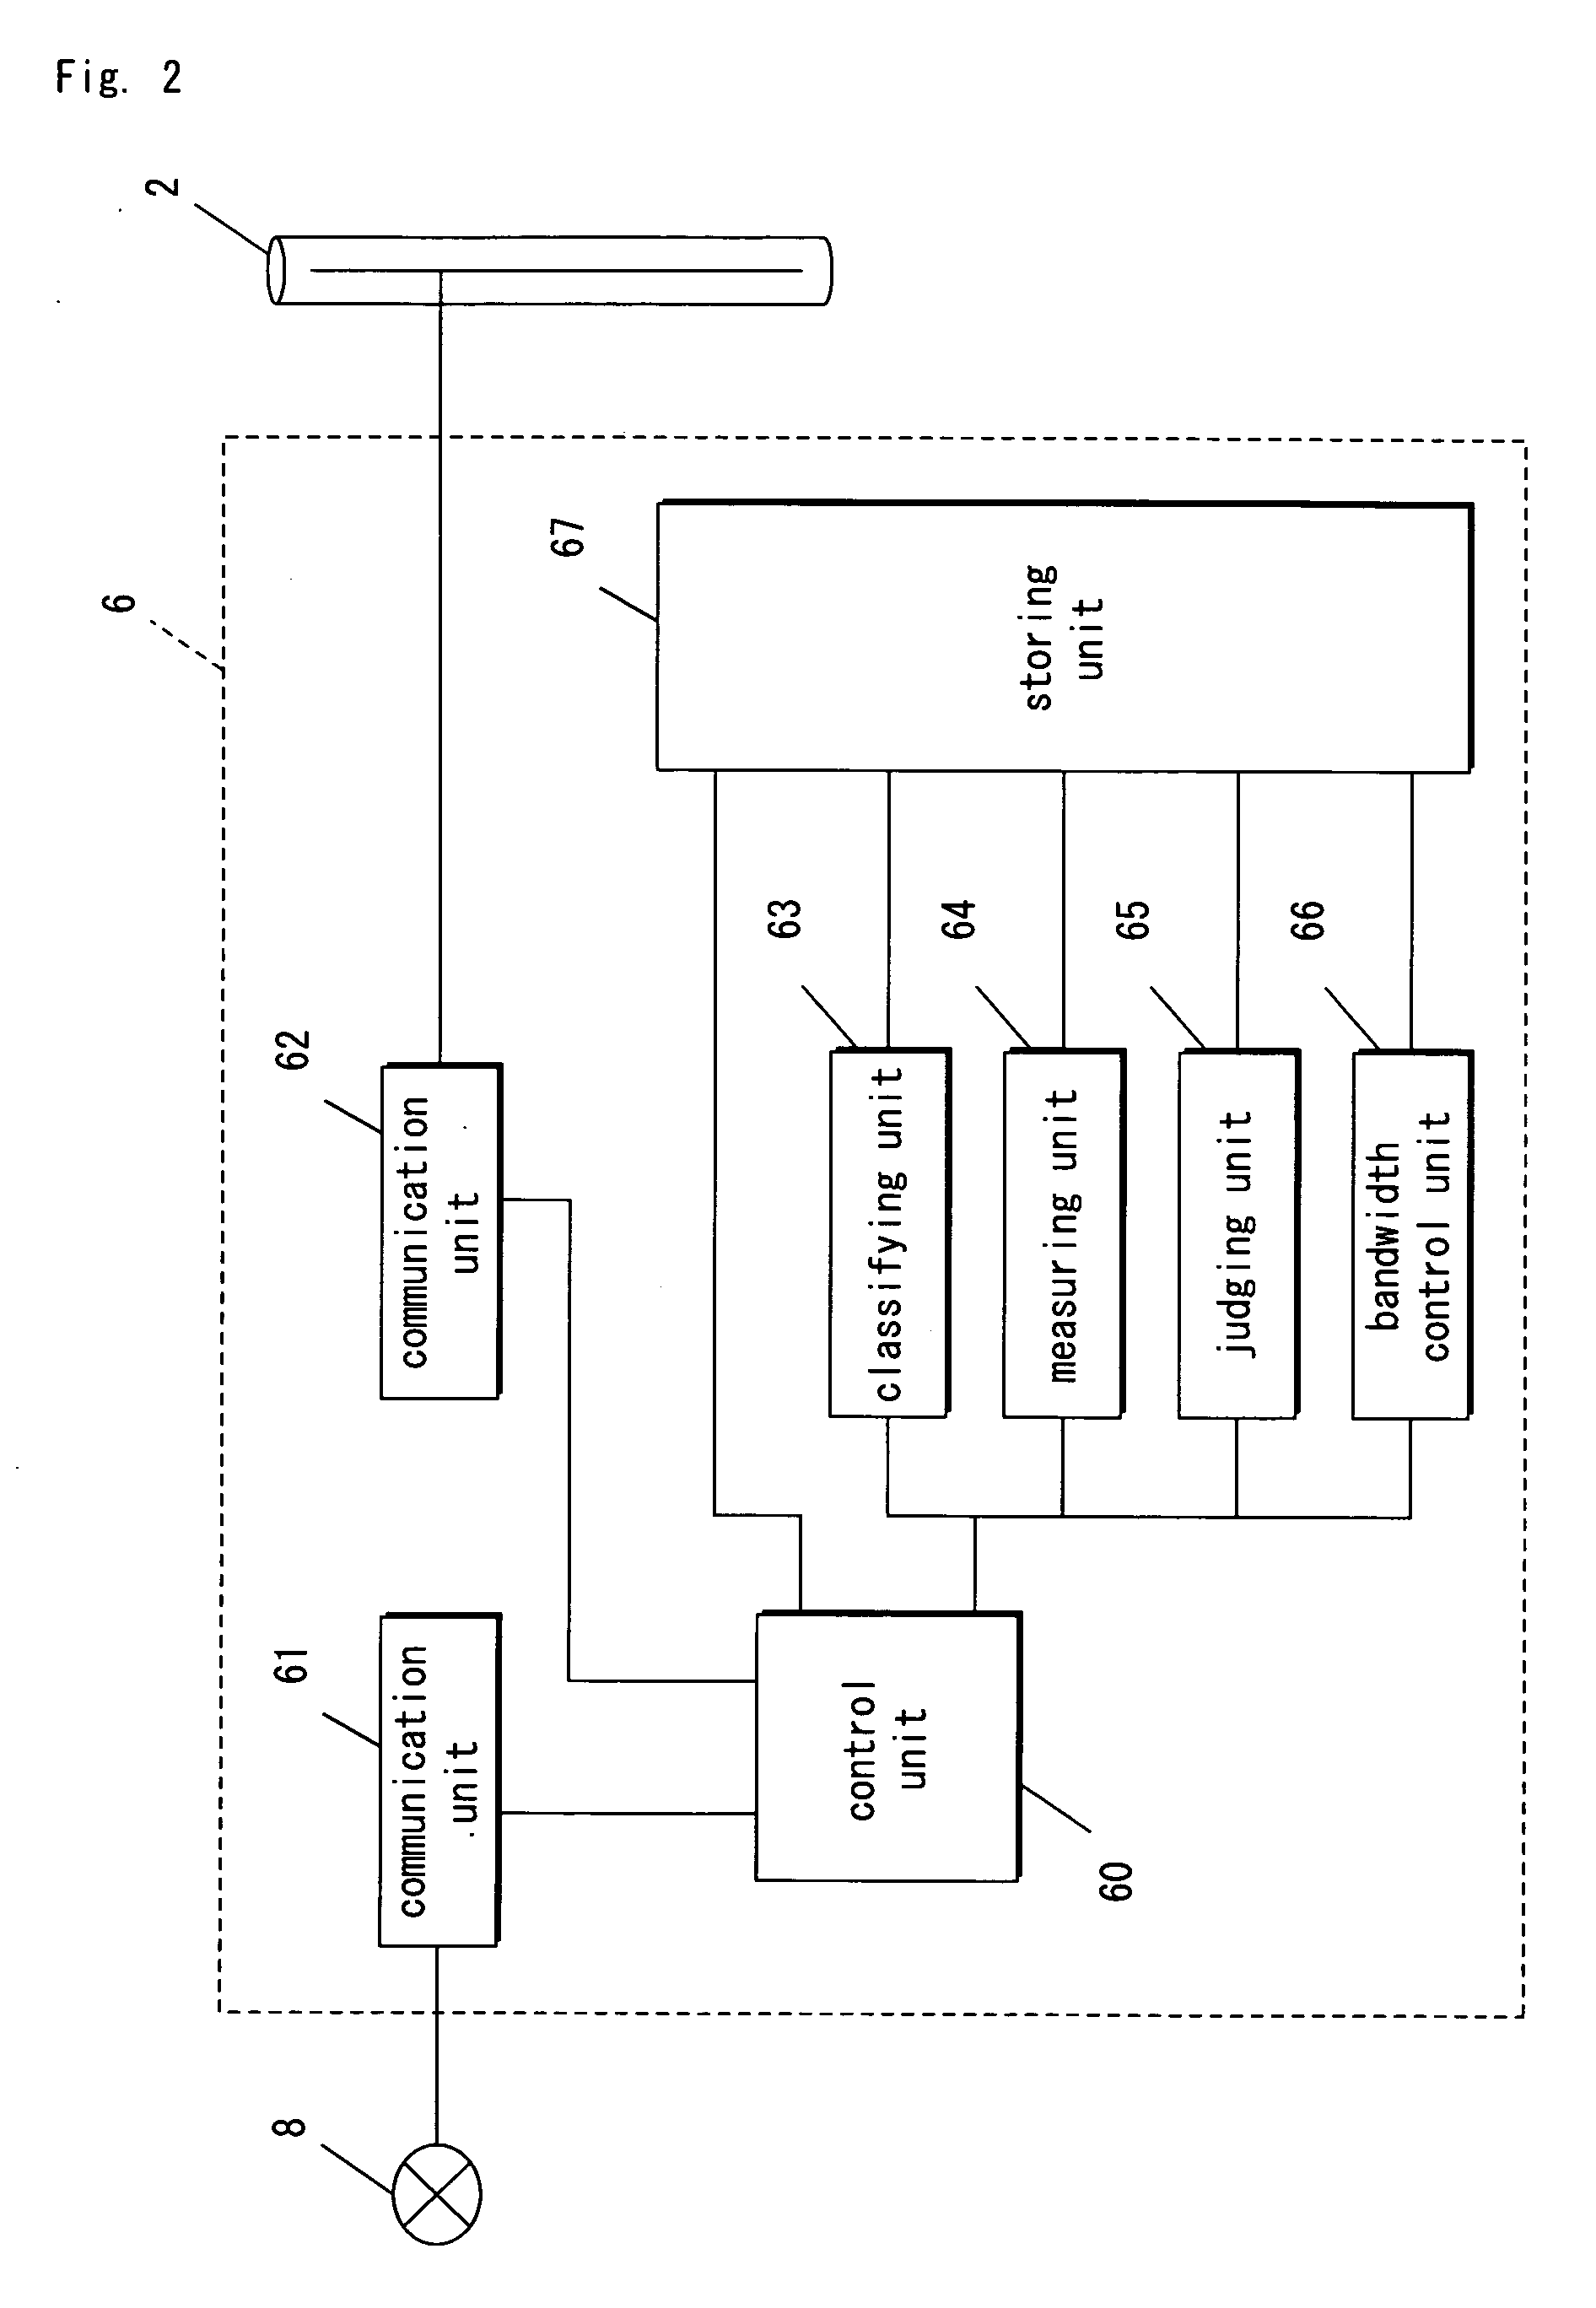 Access-controlling method, repeater, and server